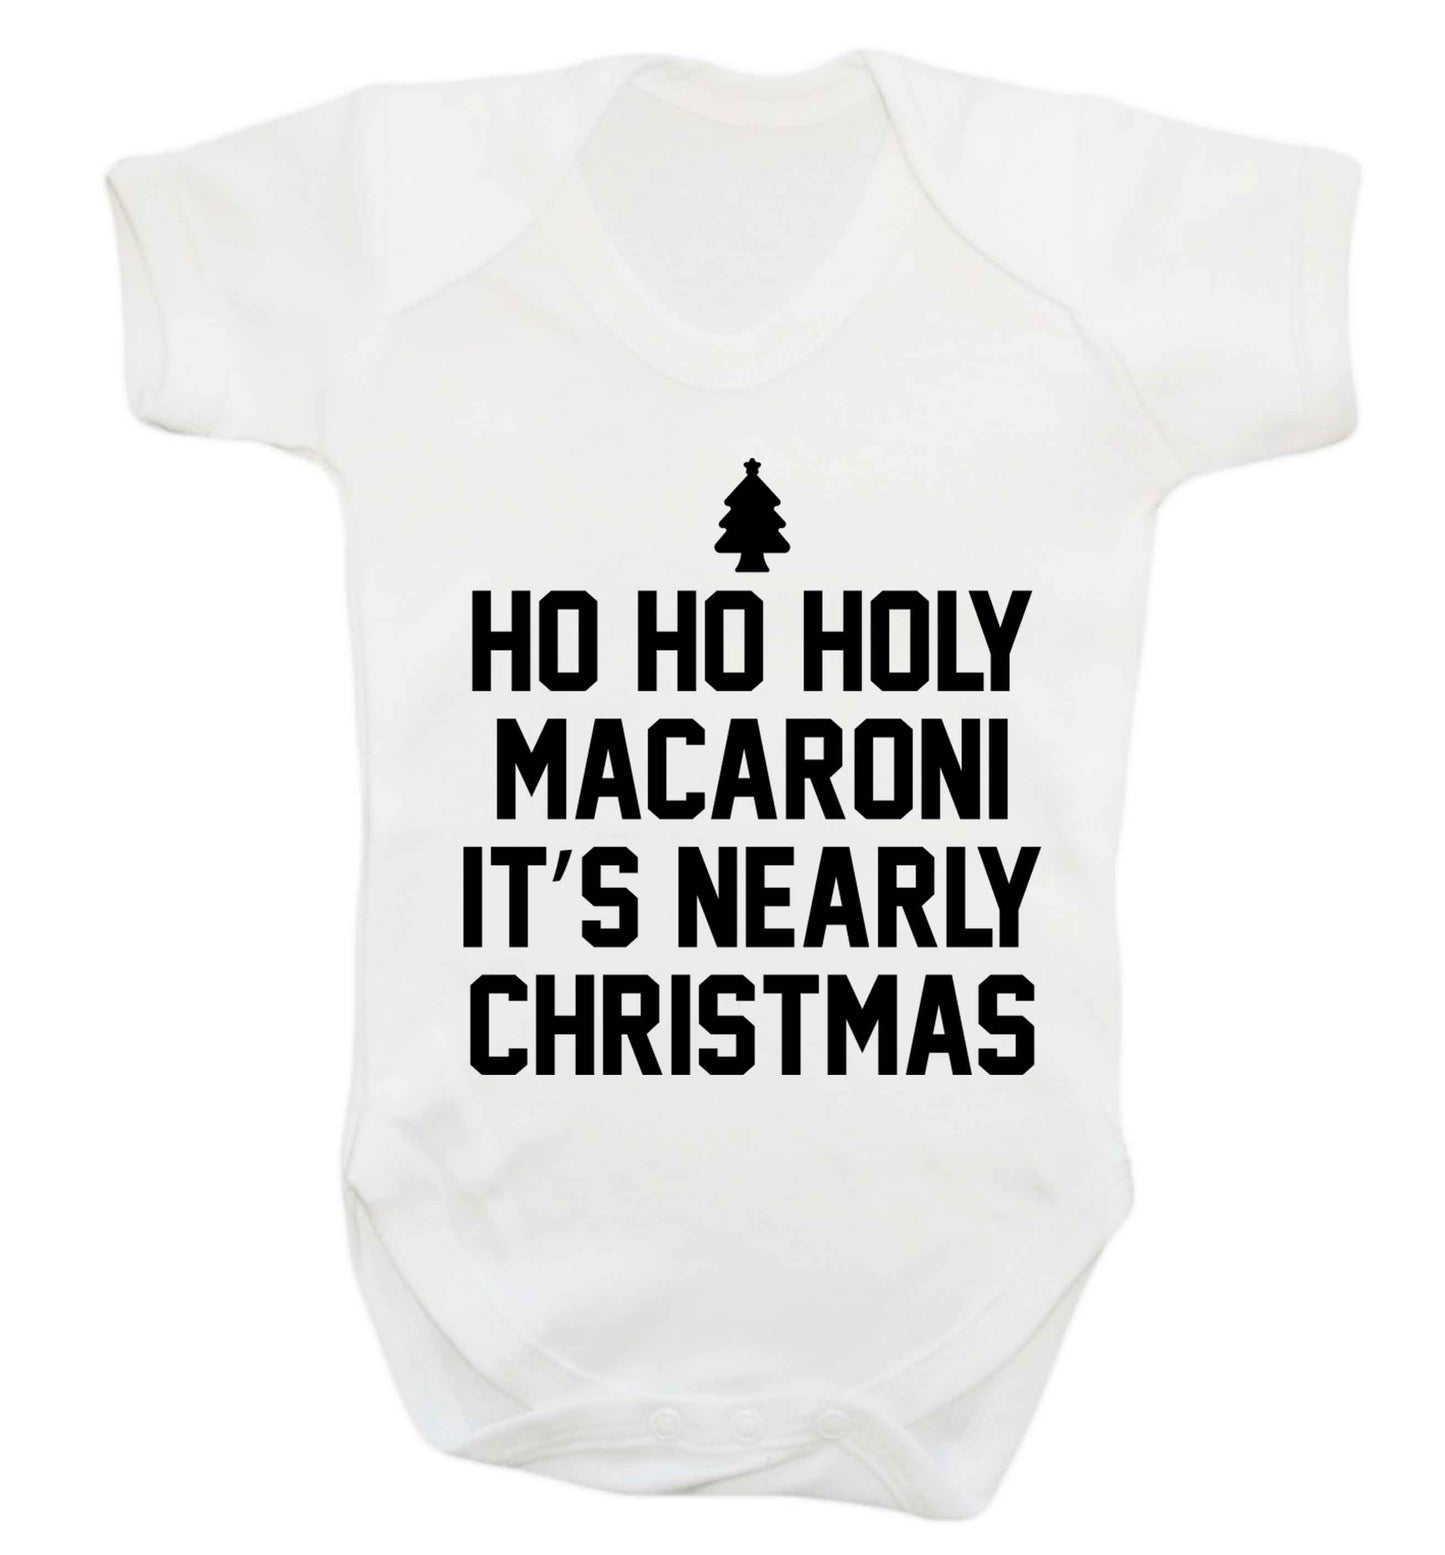 Ho ho holy macaroni it's nearly Christmas Baby Vest white 18-24 months